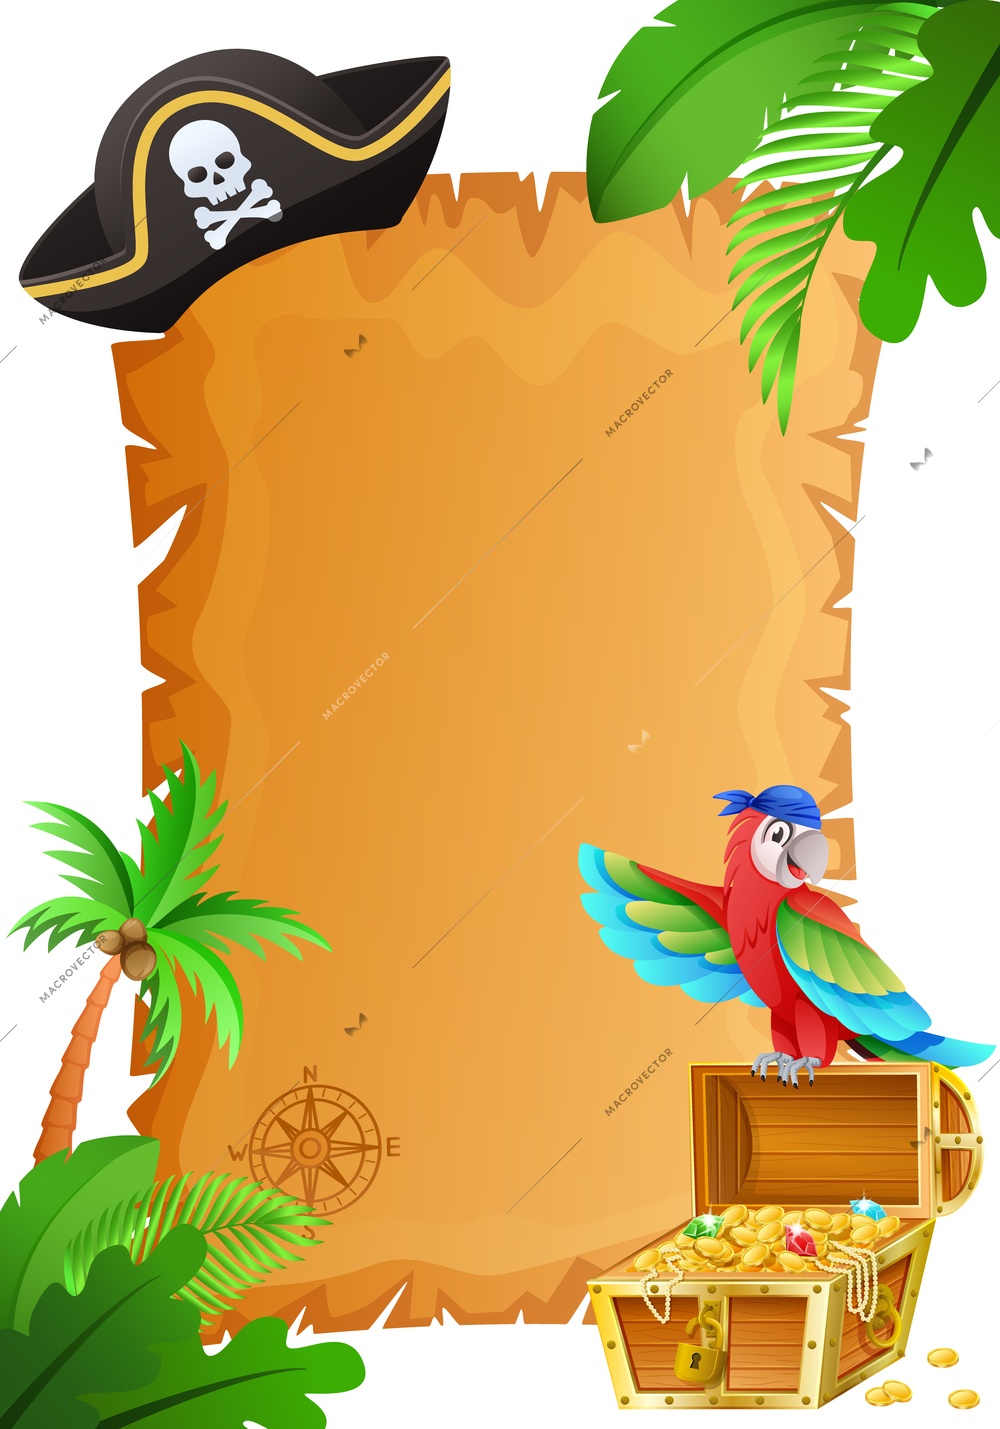 Pirate treasure map template with headdress and palm tree with parrot cartoon vector illustration